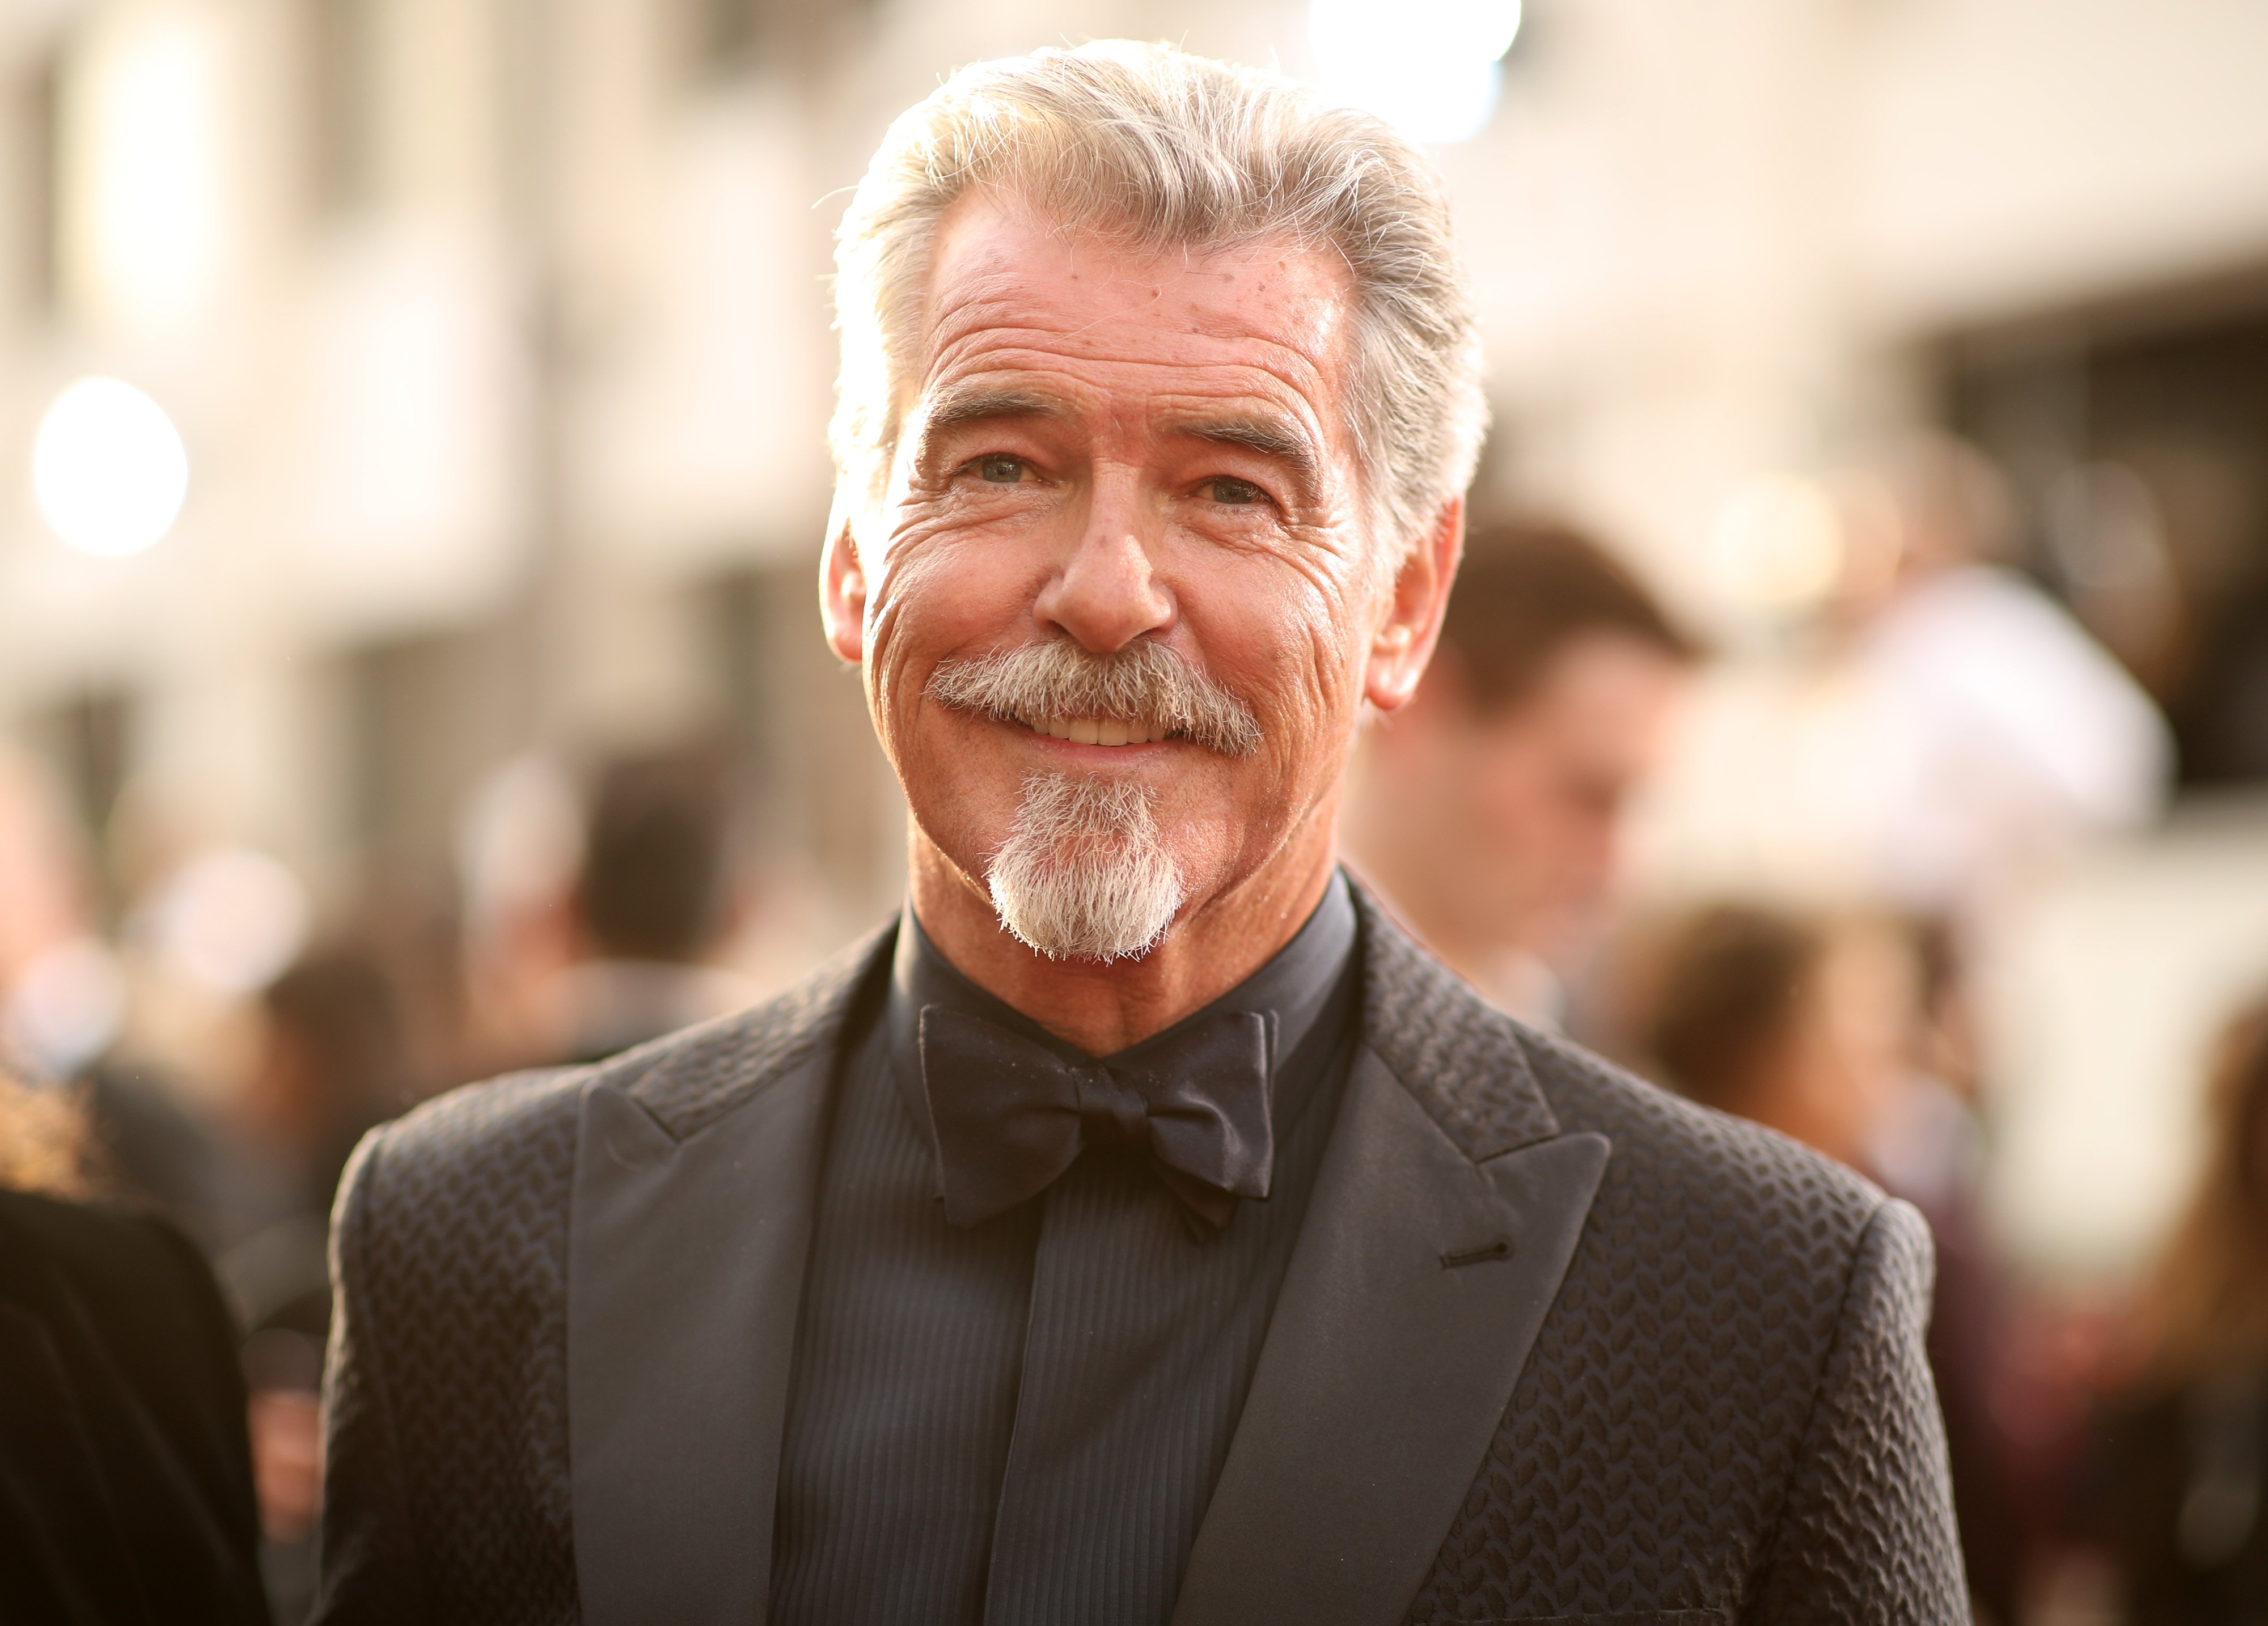 Pierce Brosnan arrives to the 77th Annual Golden Globe Awards held at the Beverly Hilton Hotel on January 5, 2020 | Photo: Getty Images